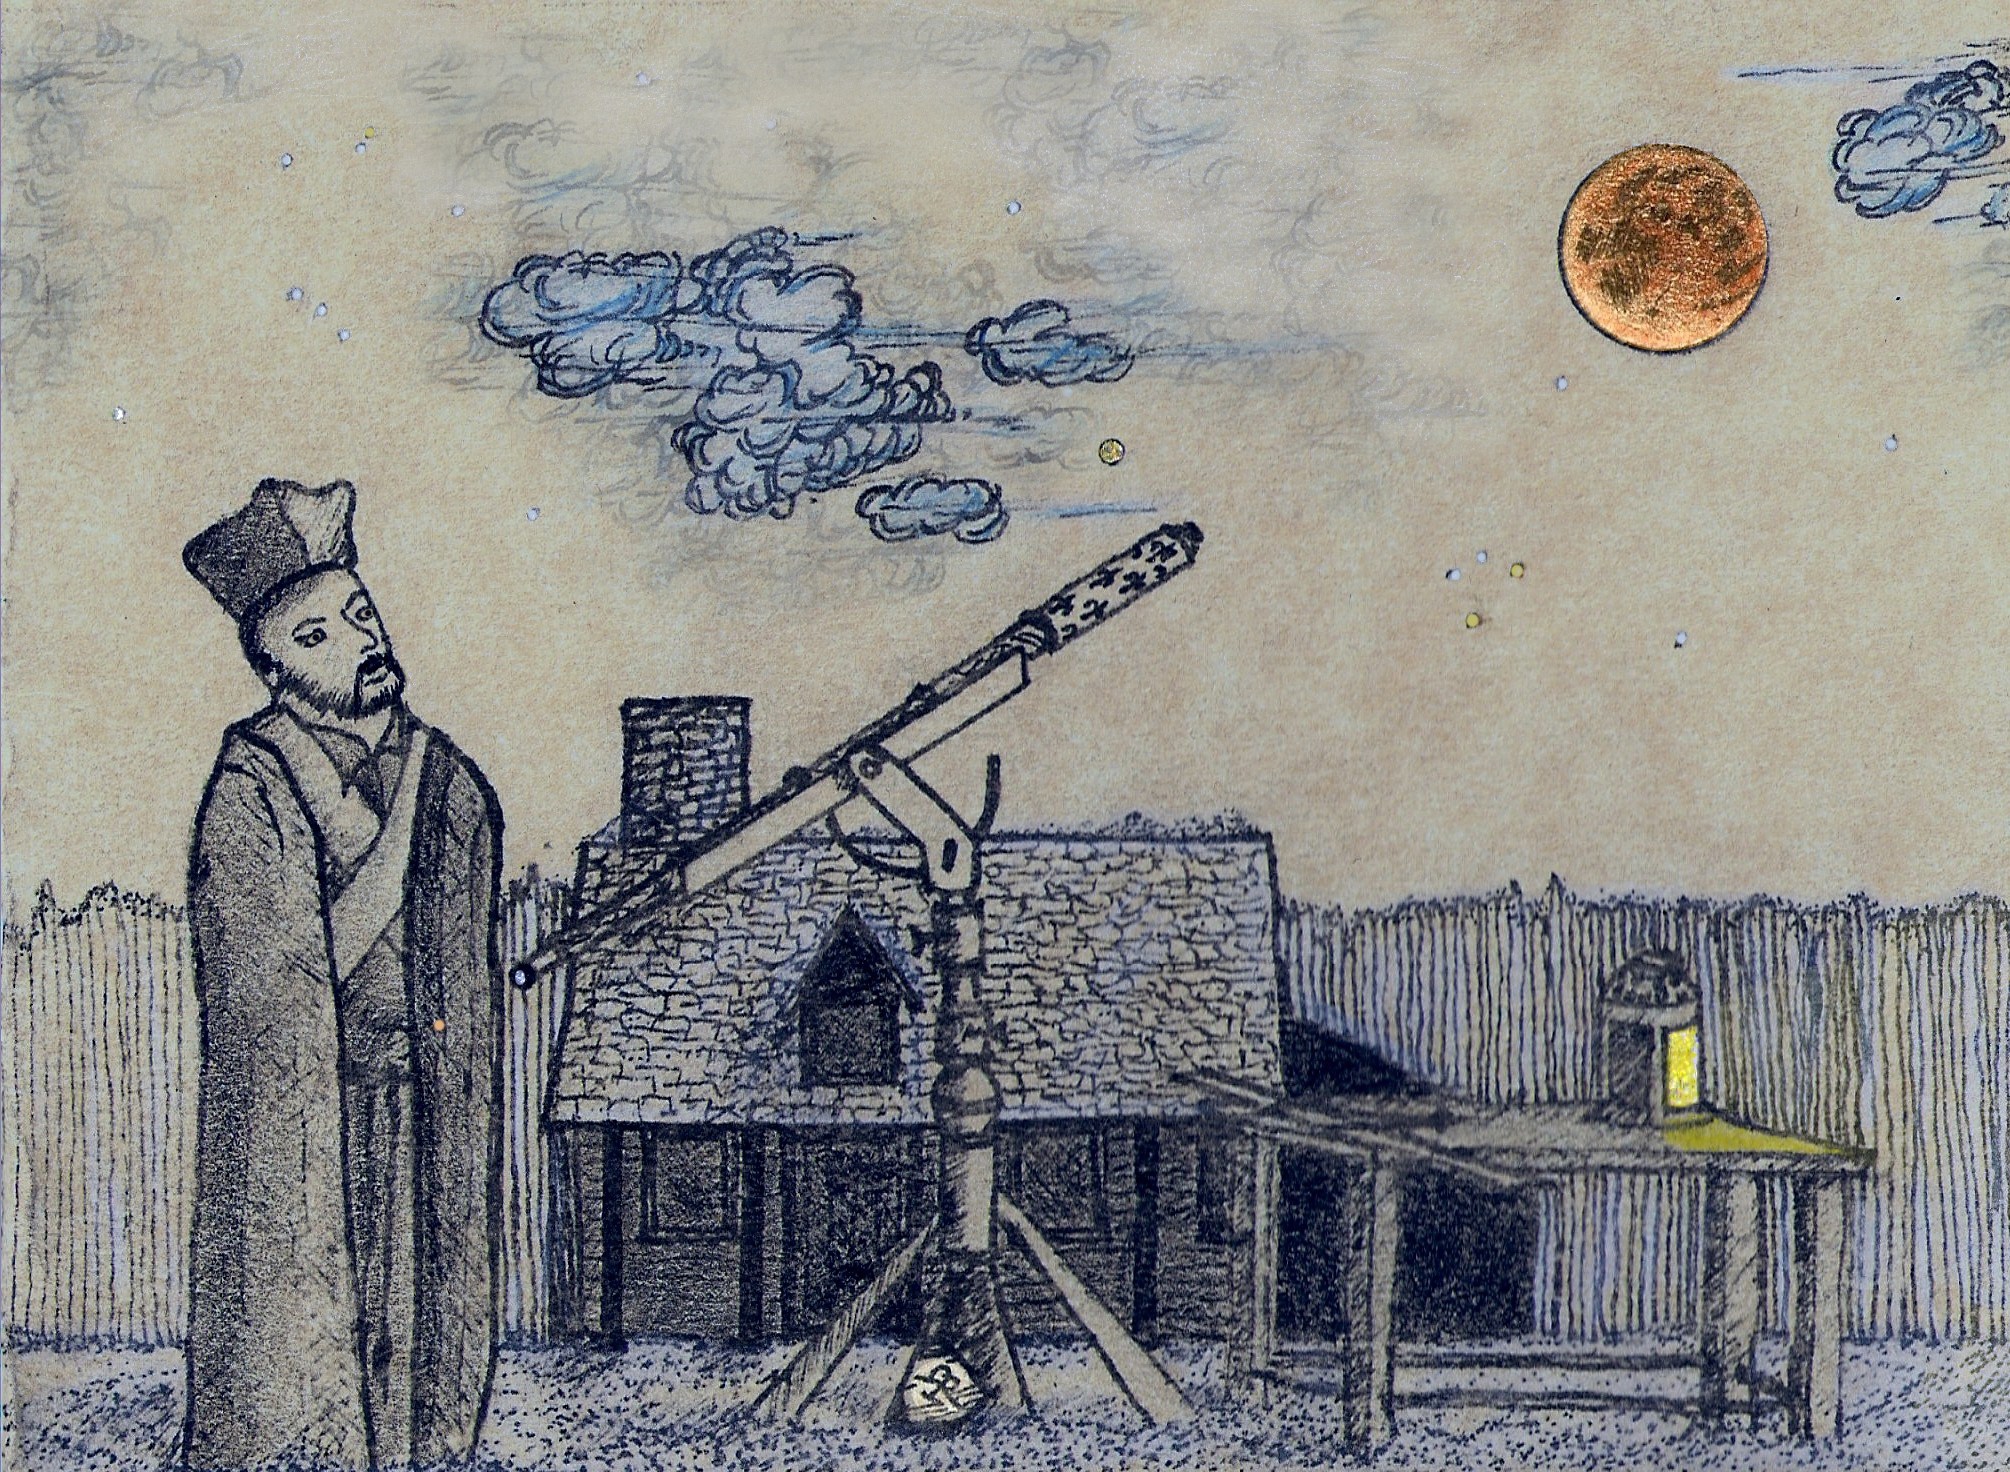 A drawing of a person standing in front of a telescope